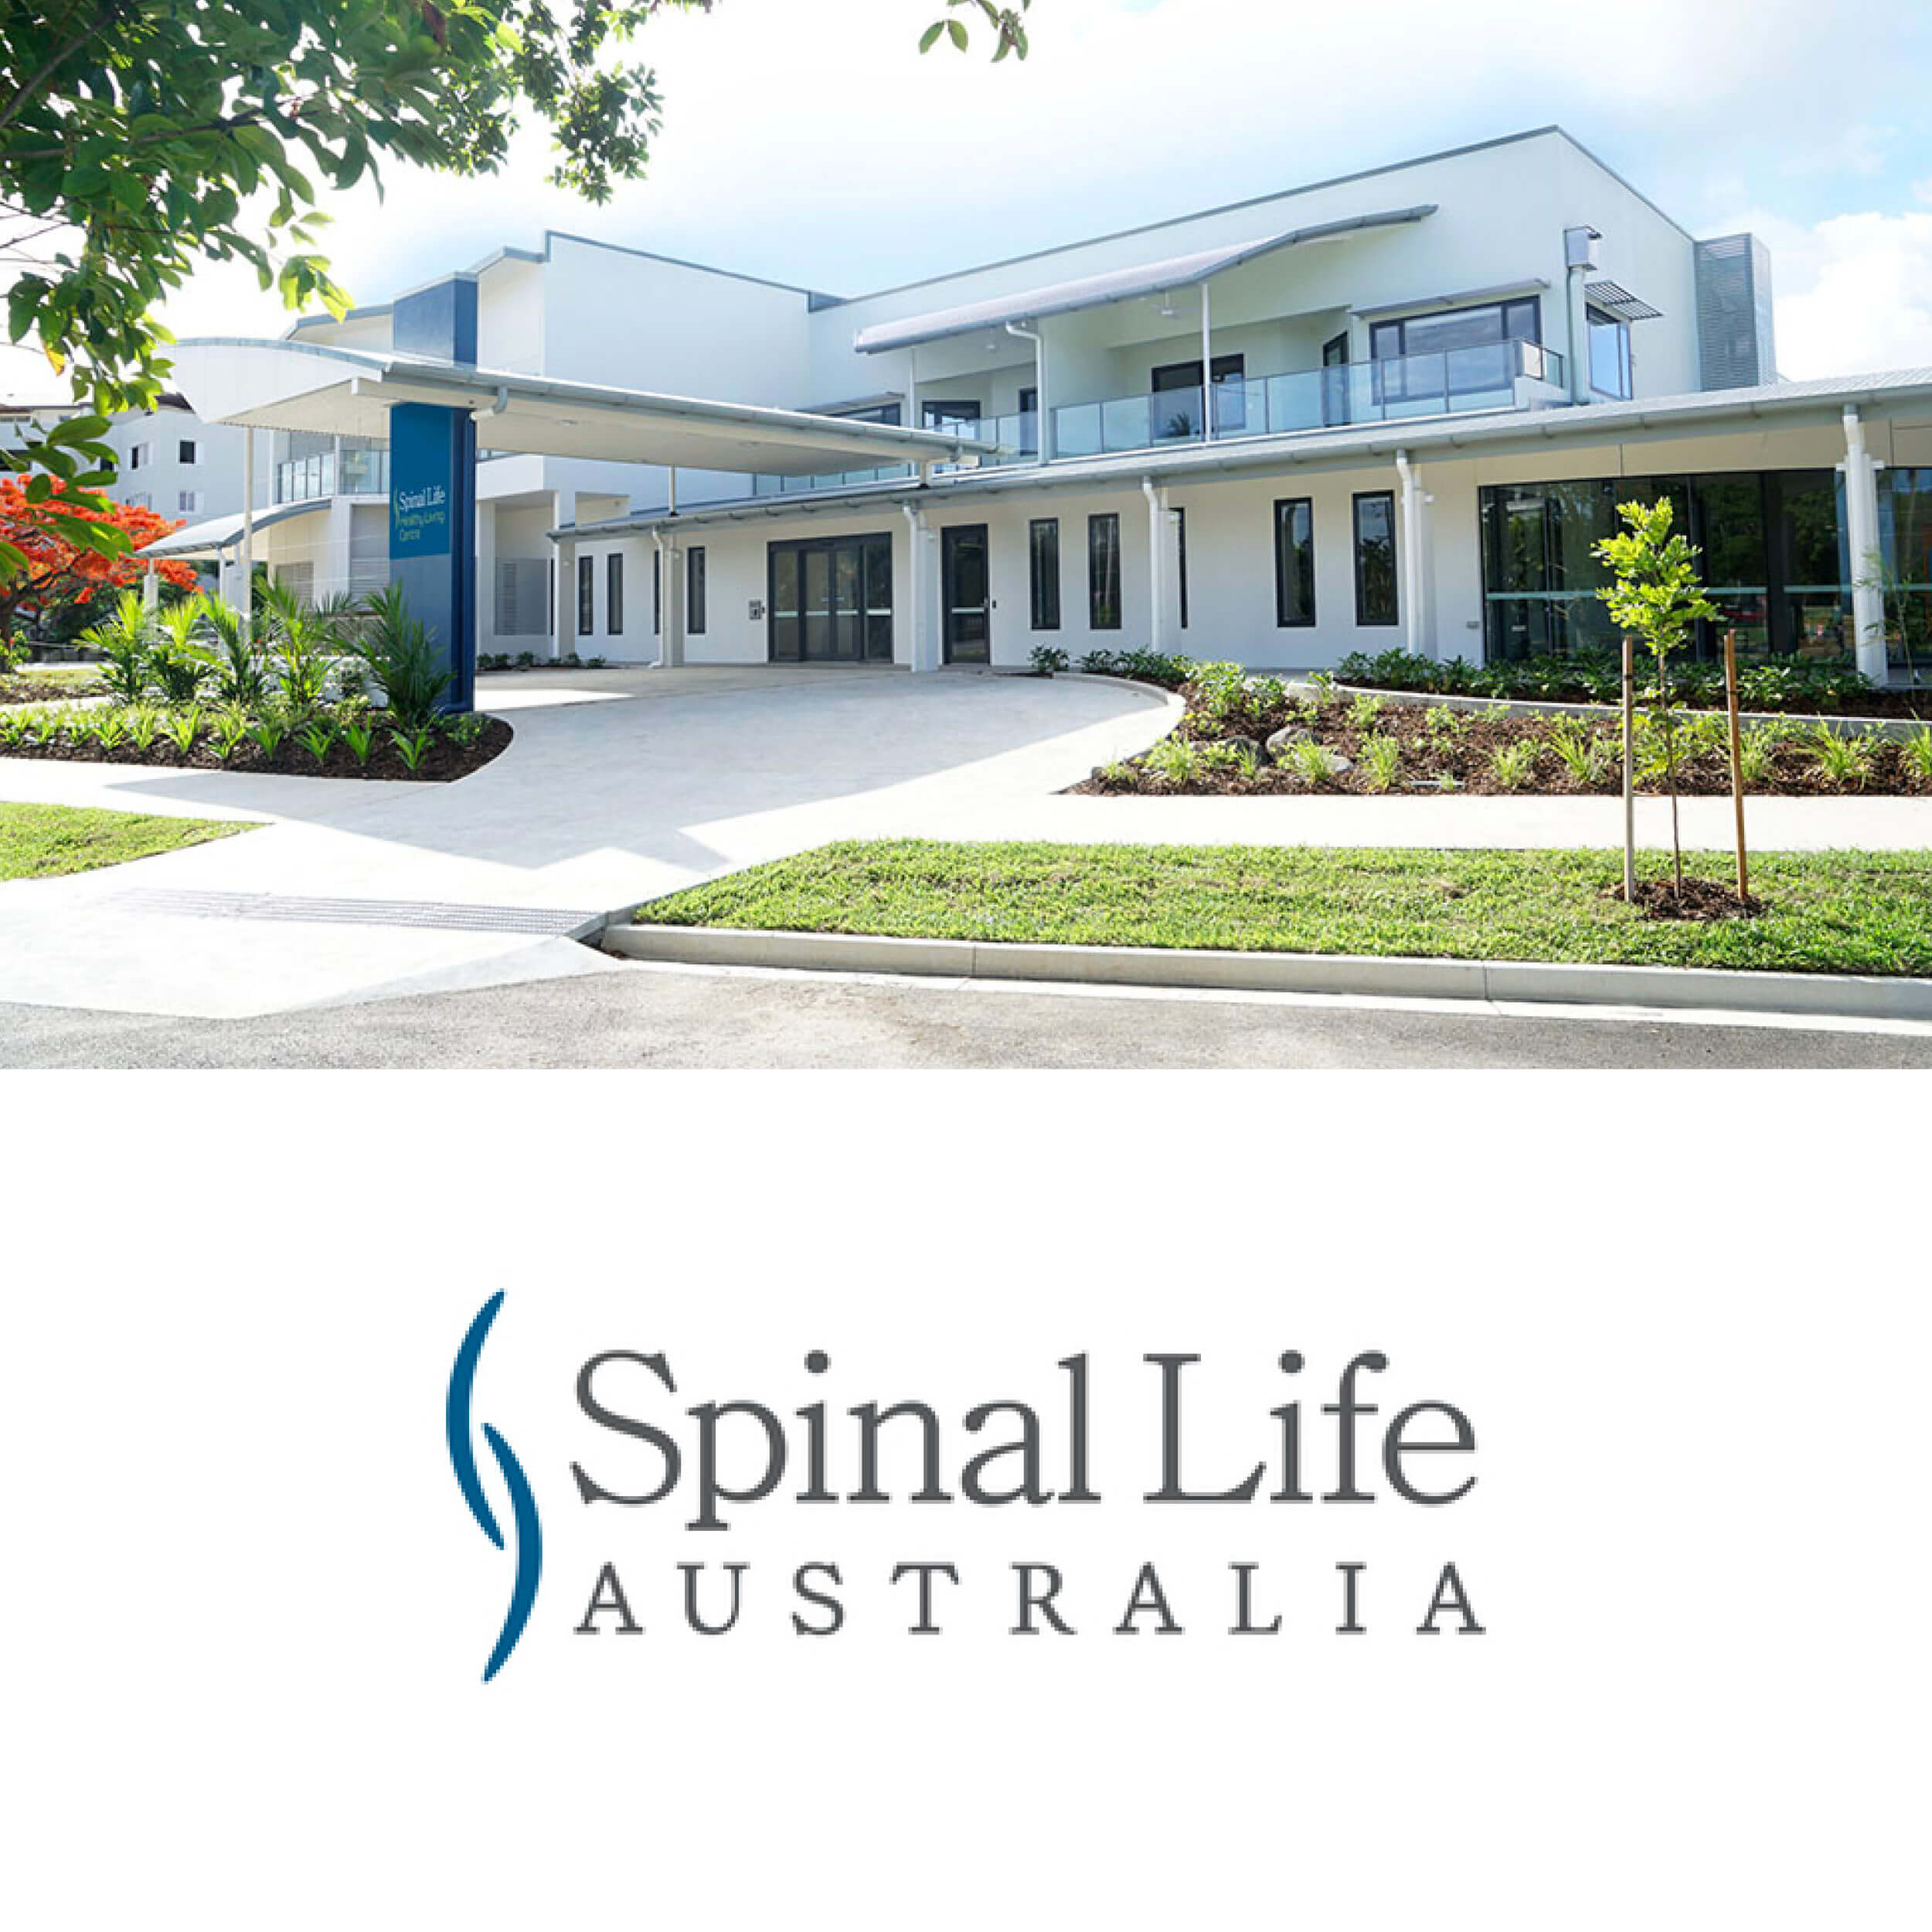 Spinal Life Healthy Living Centre